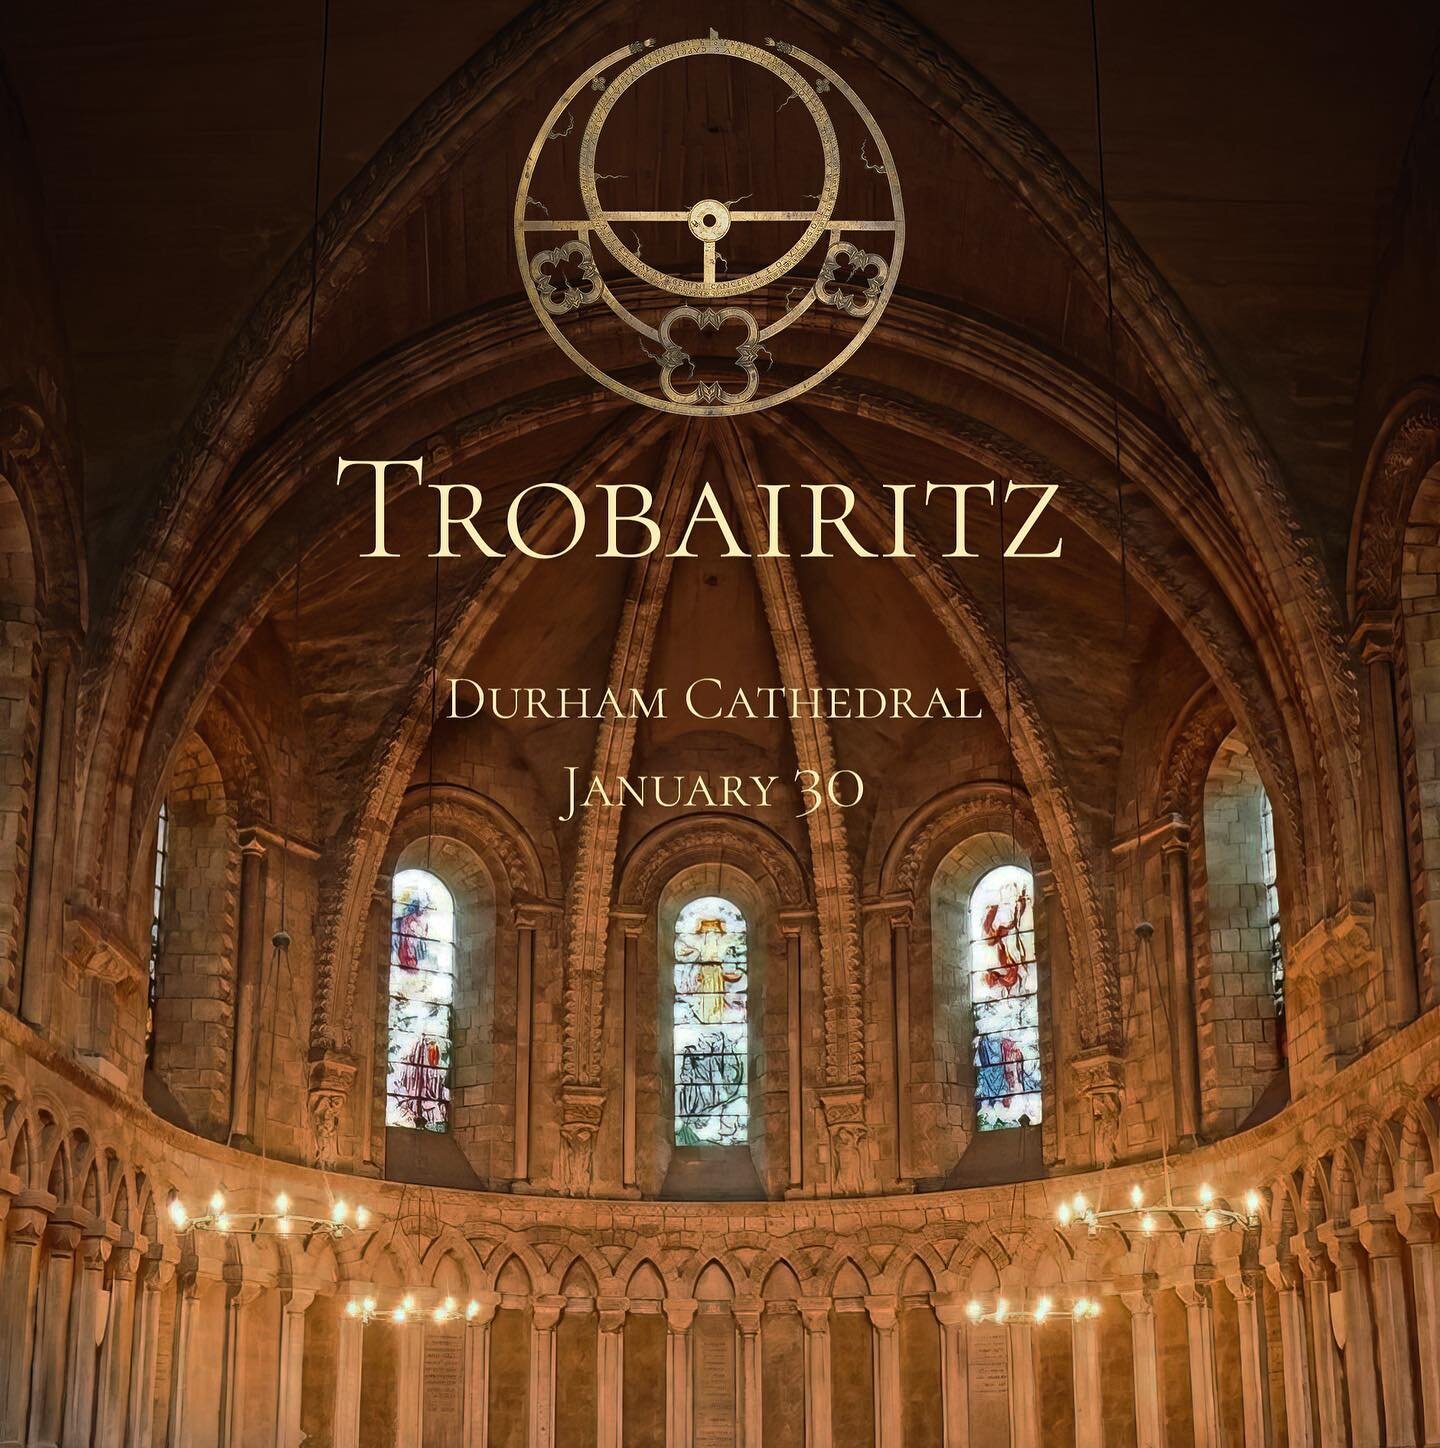 CONCERT ALERT! 

We are absolutely thrilled to announce our up and coming concert at Durham Cathedral on the 30th January! This special event celebrates the legacy of the female troubadours, the trobairitz, and traces the mystical path of Gnosticism,